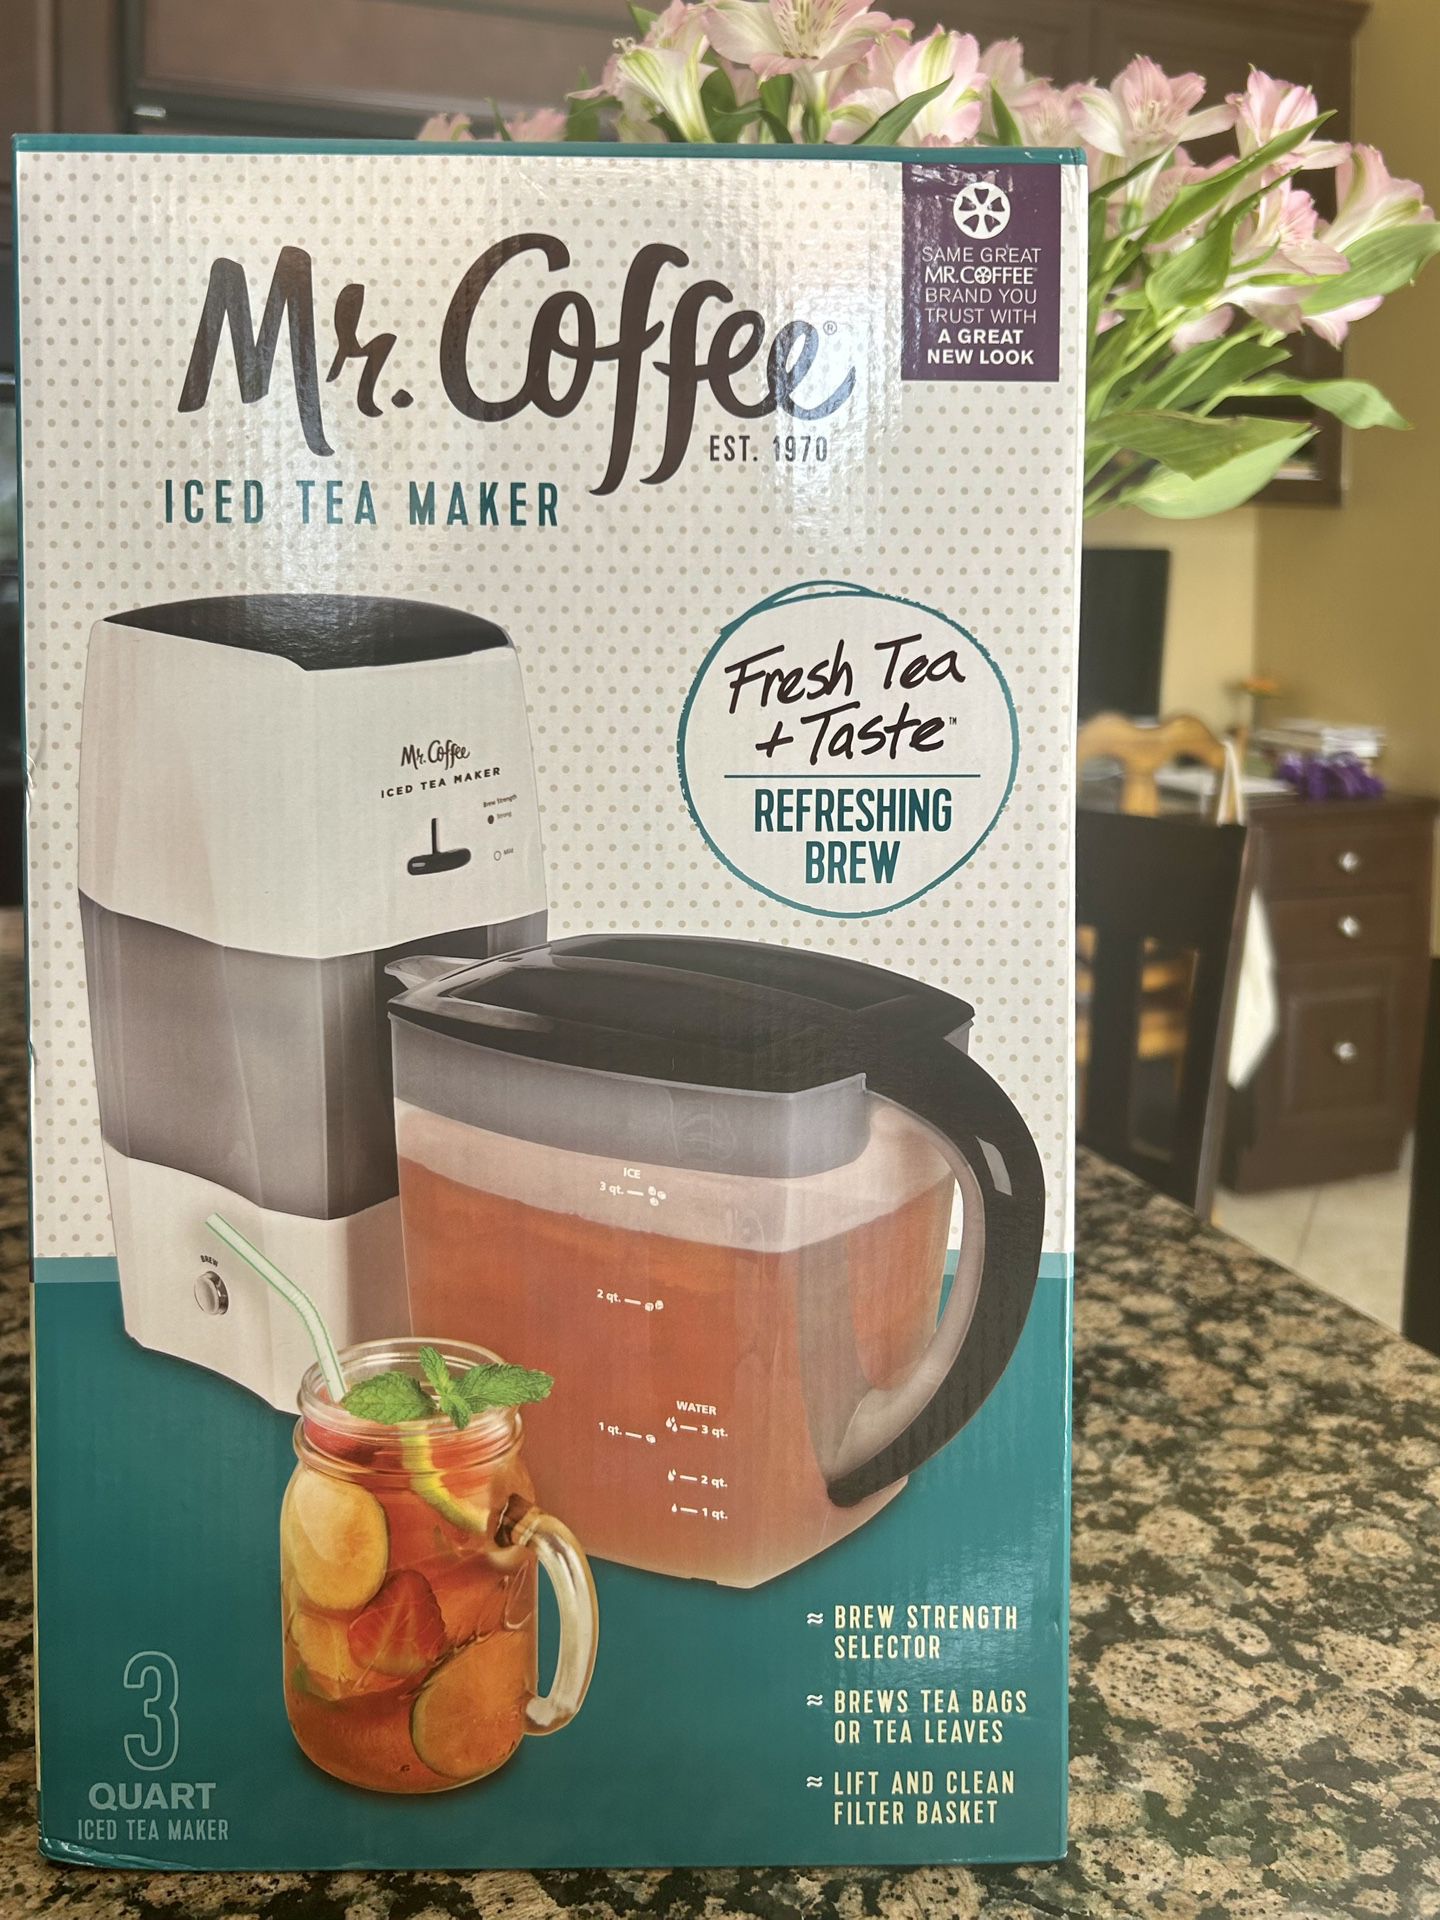 Iced Tea Maker by Mr. Coffee Unopened Brand New for Sale in Yorba Linda, CA  - OfferUp